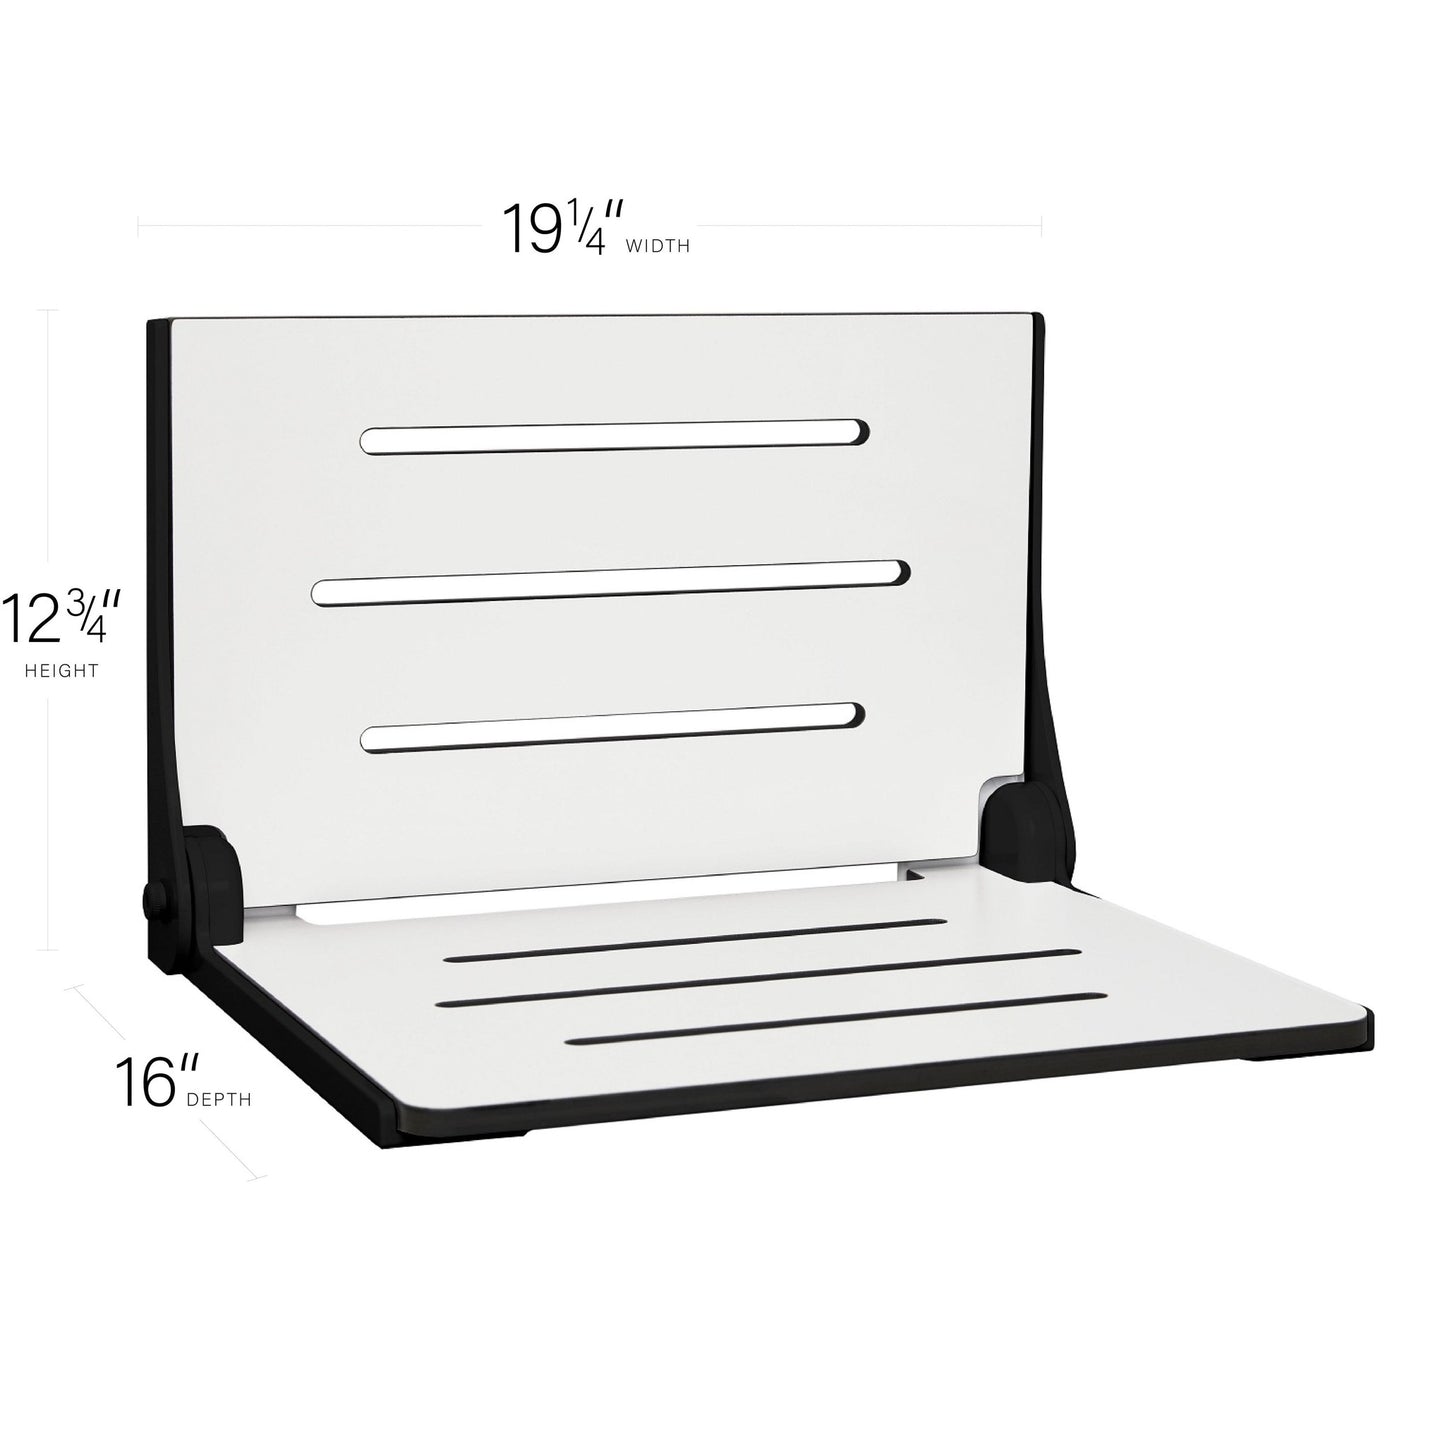 Seachrome Silhouette 19" Phenolic White Seat Top and Matte Black Frame Wall Mounted High Back Shower Seat